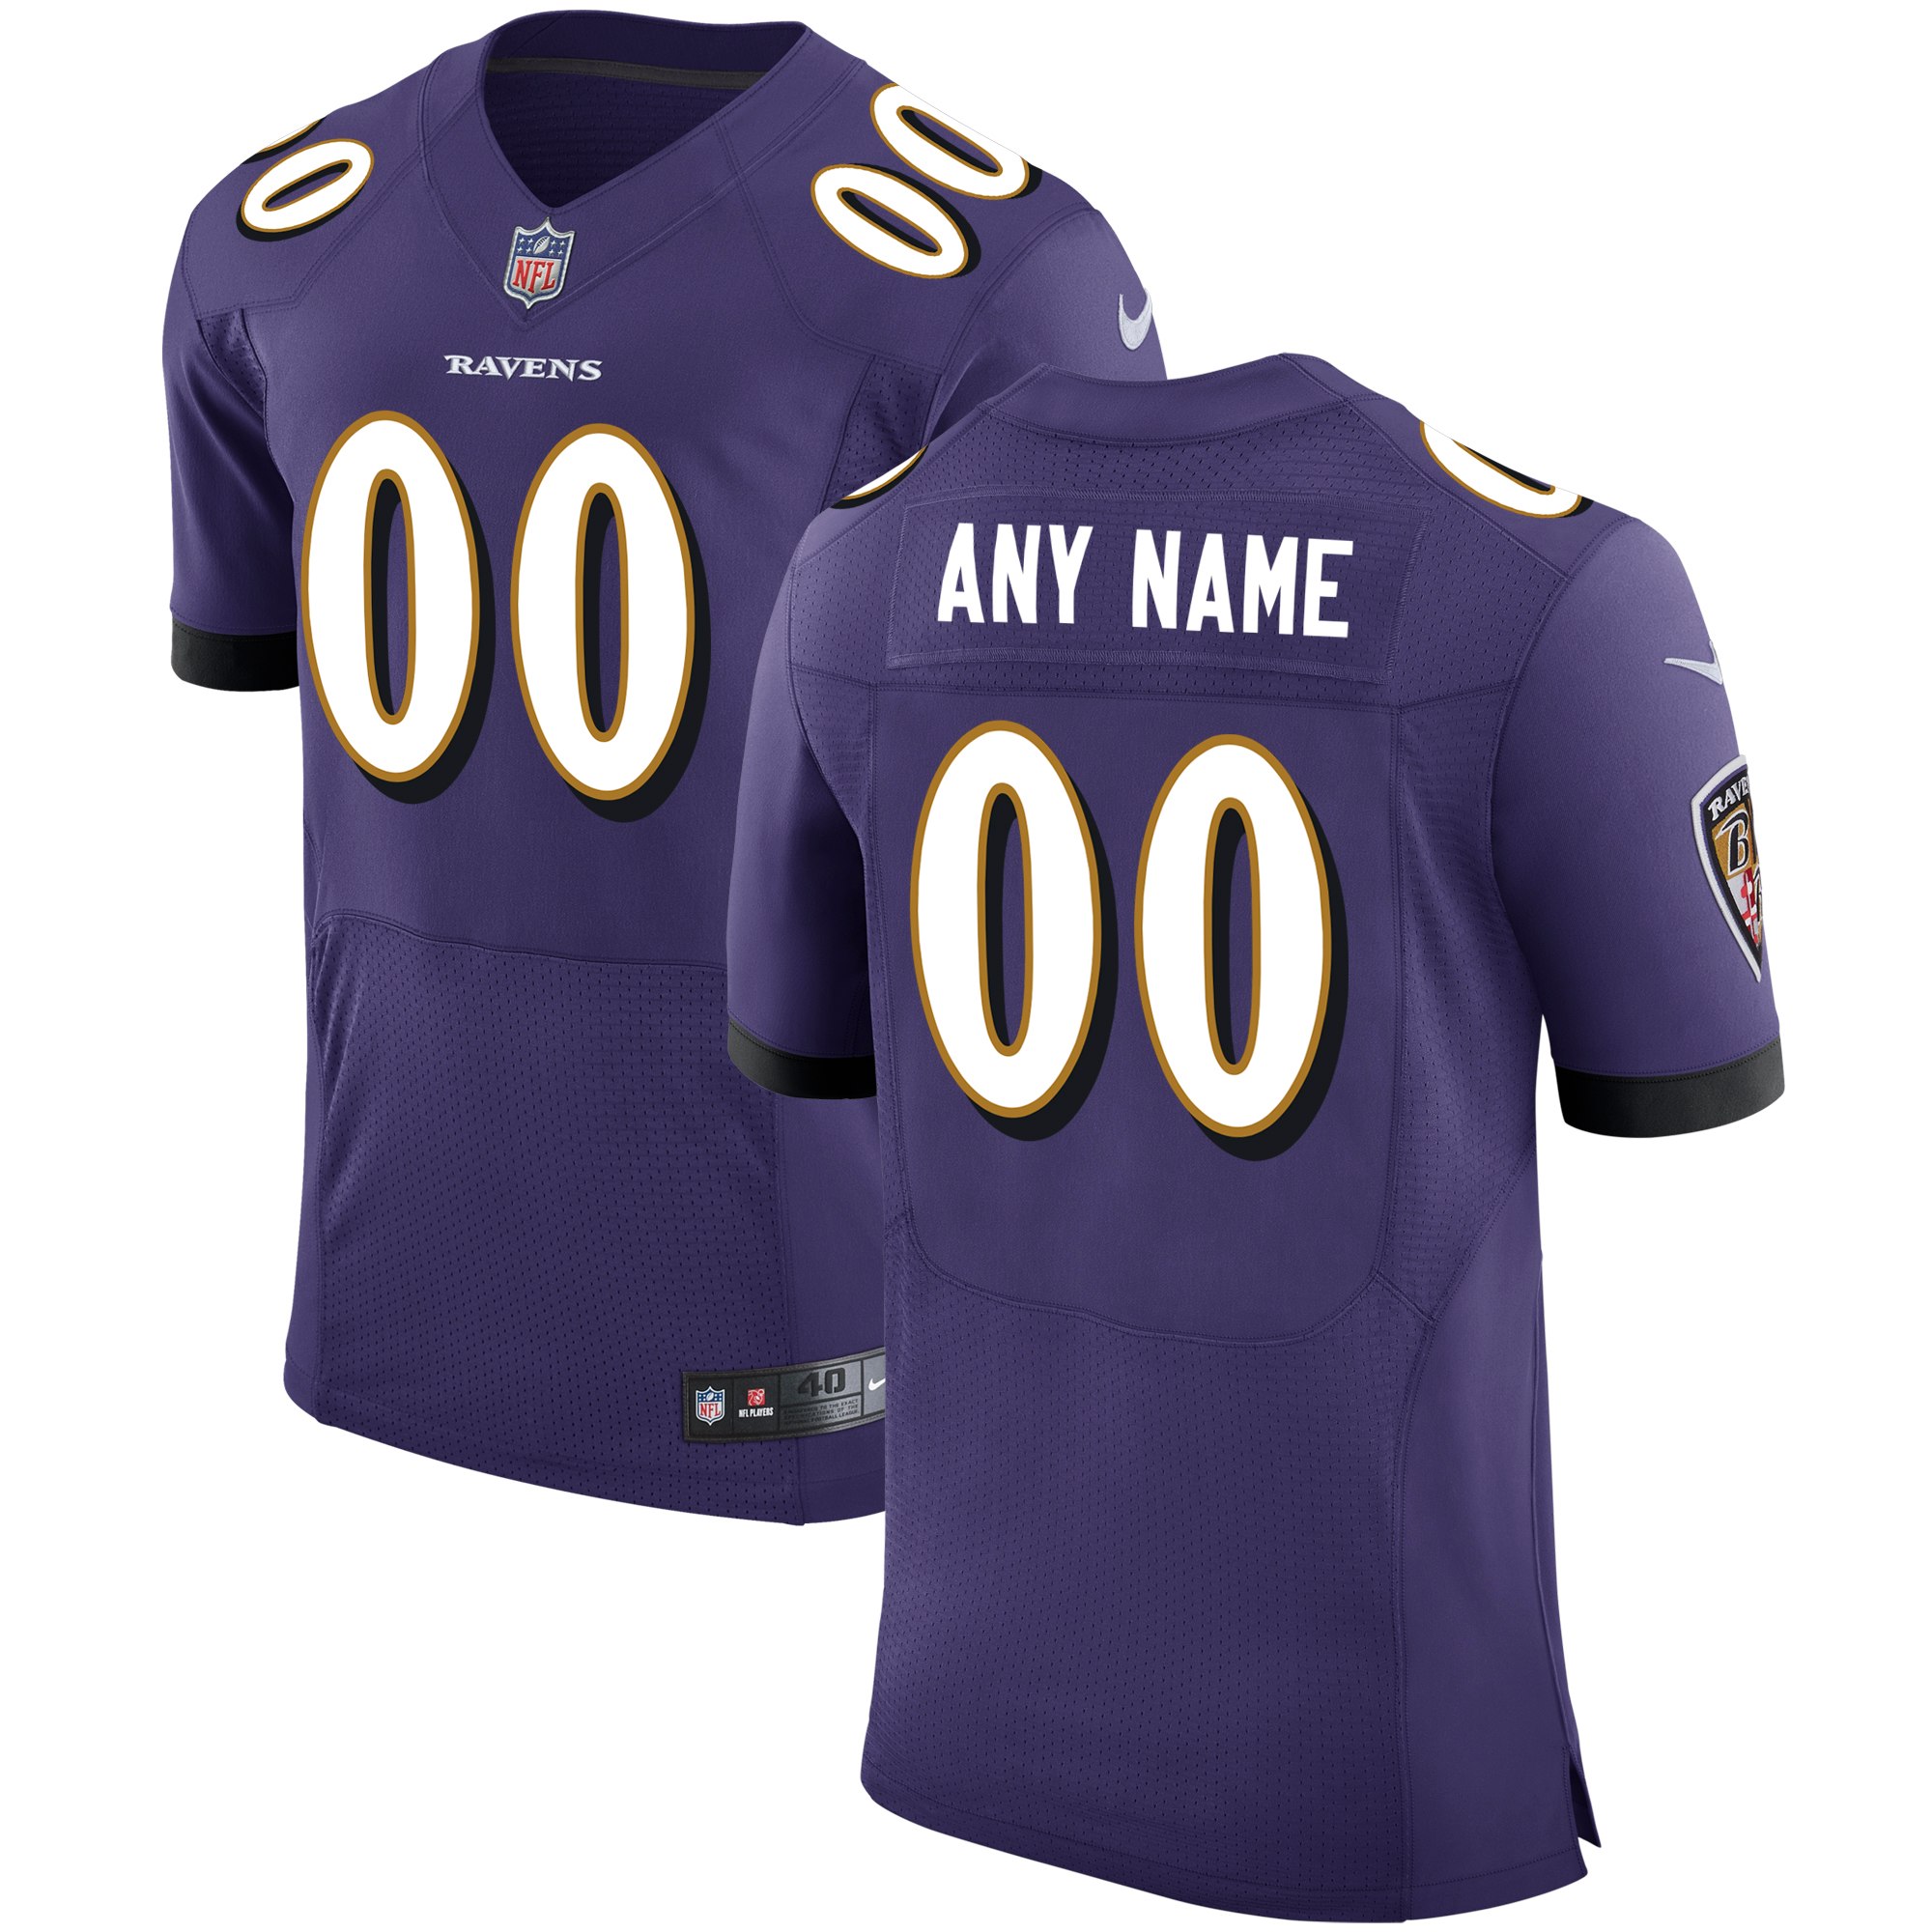 Men's Baltimore Ravens Purple Speed Machine Custom Elite Stitched NFL Jersey (Check description if you want Women or Youth size)